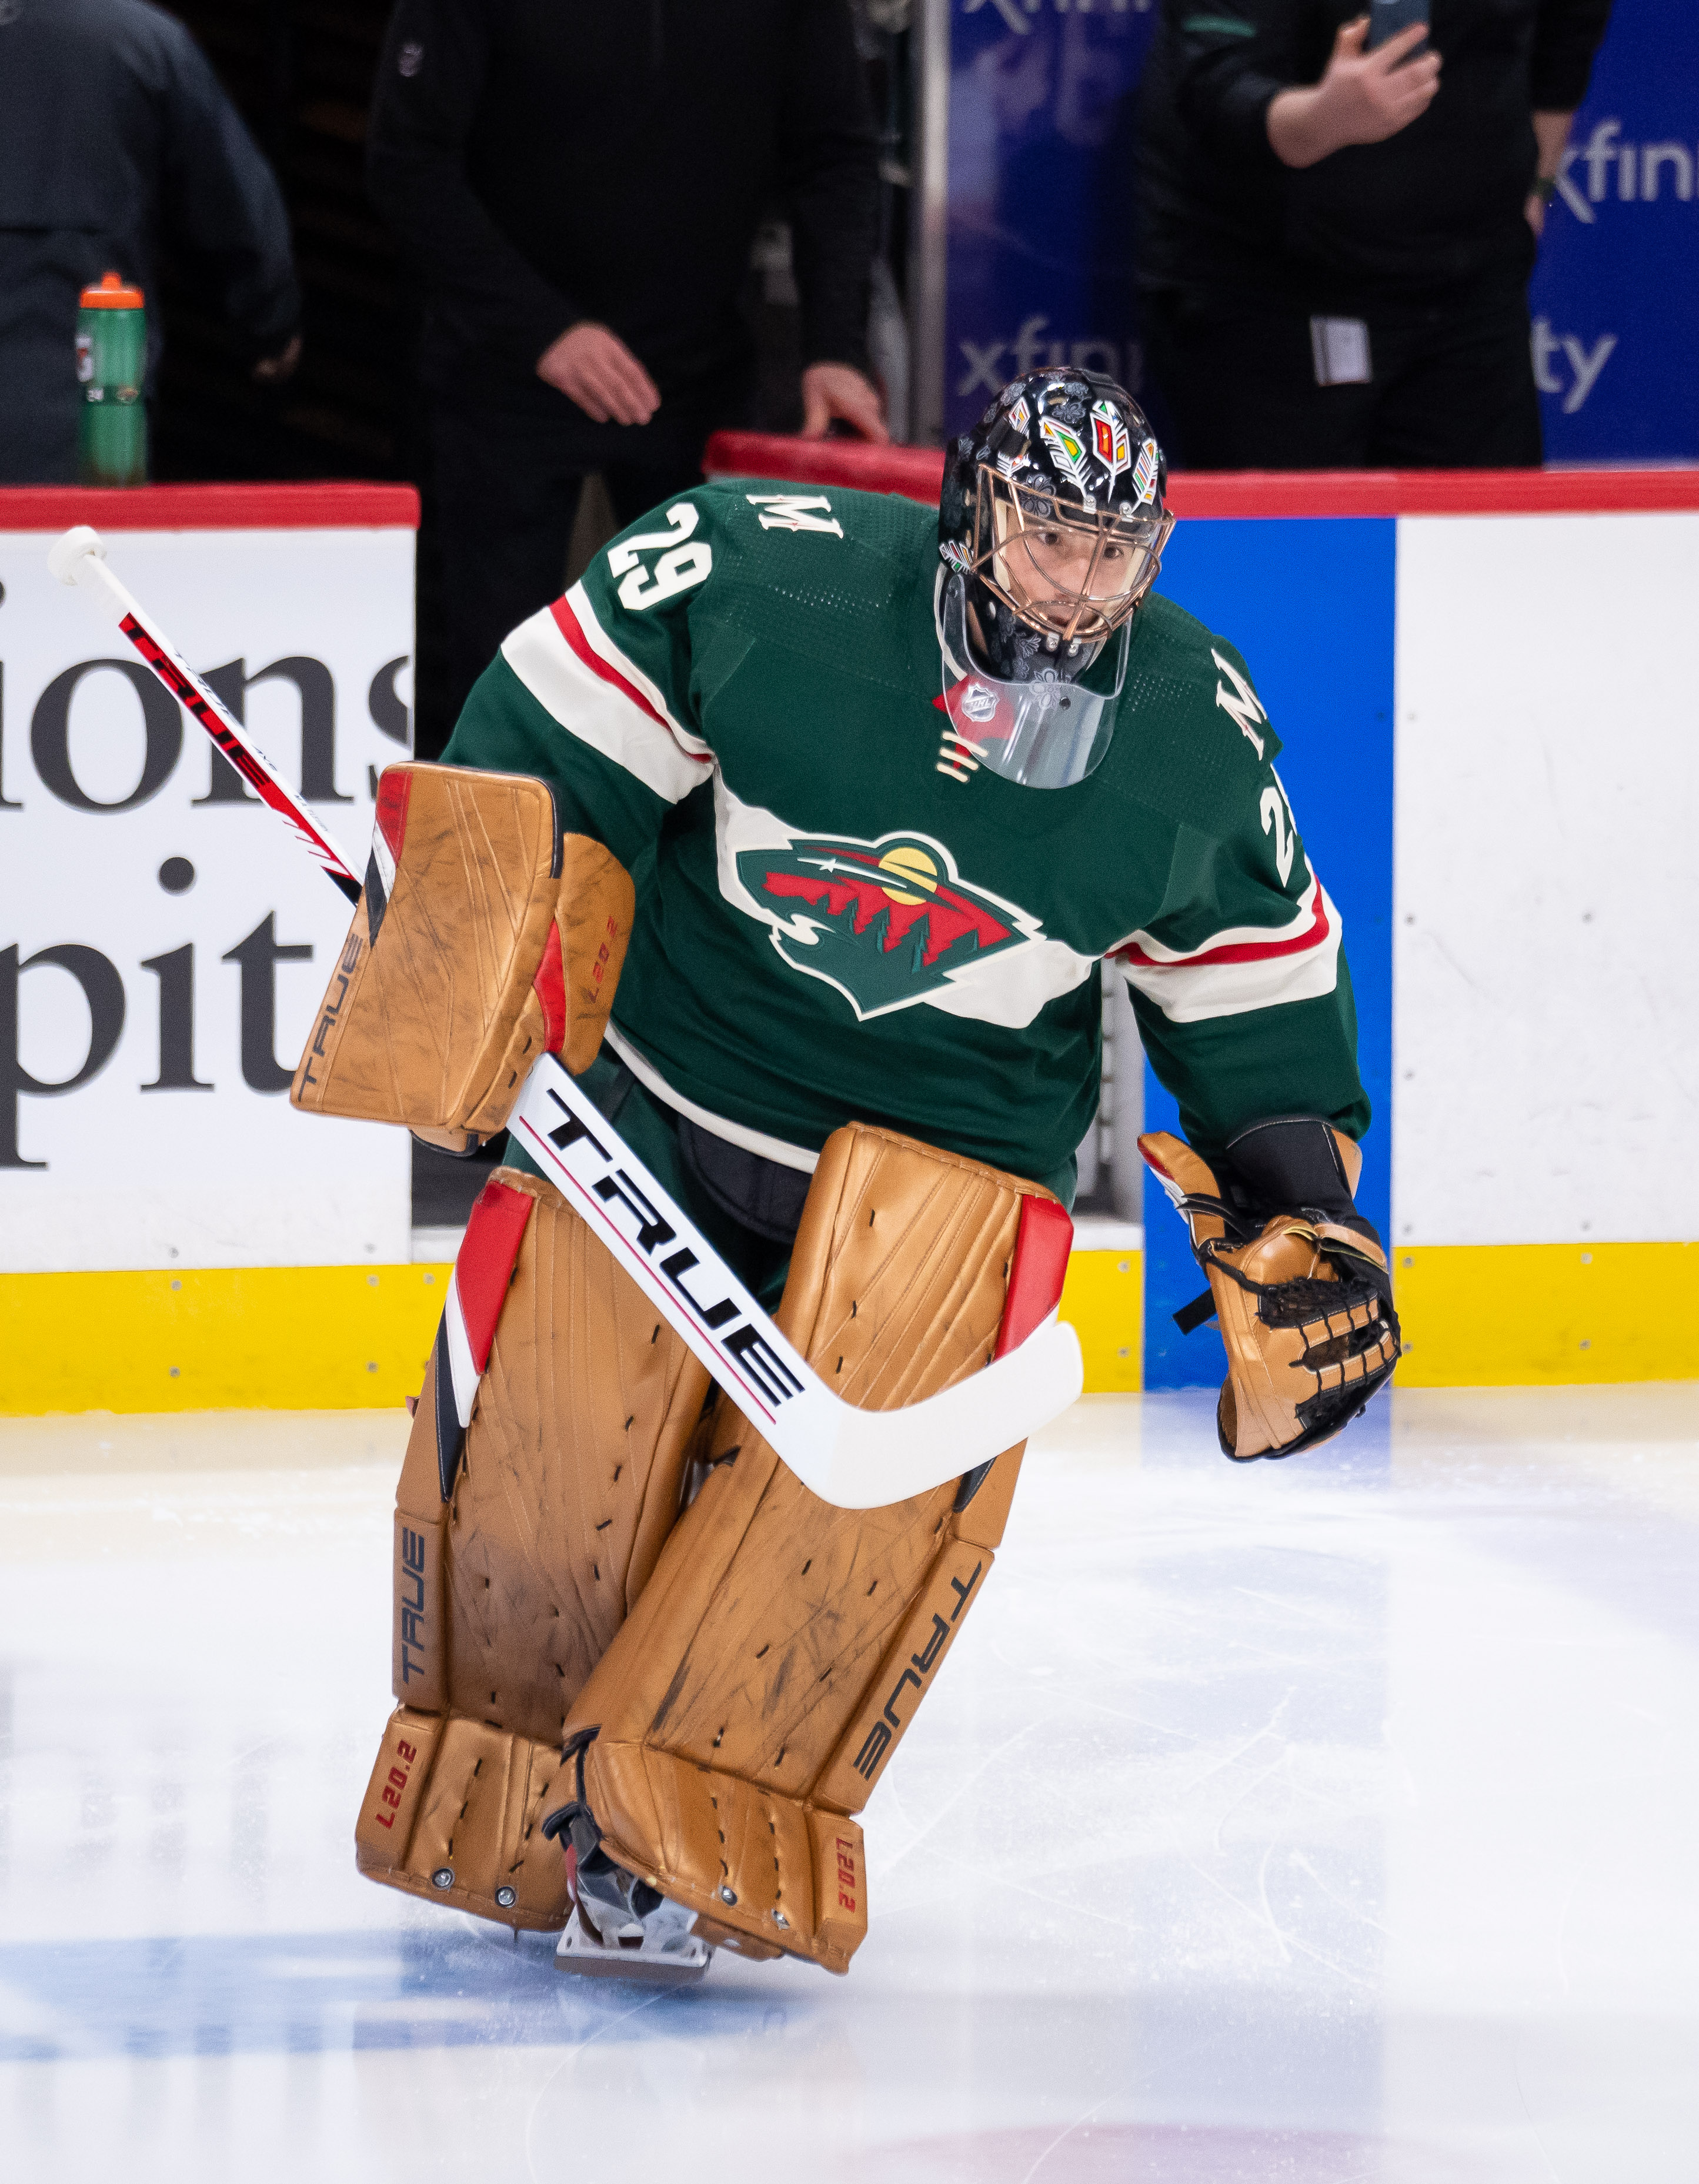 Marc-Andre Fleury Minnesota Wild activated from injured reserve